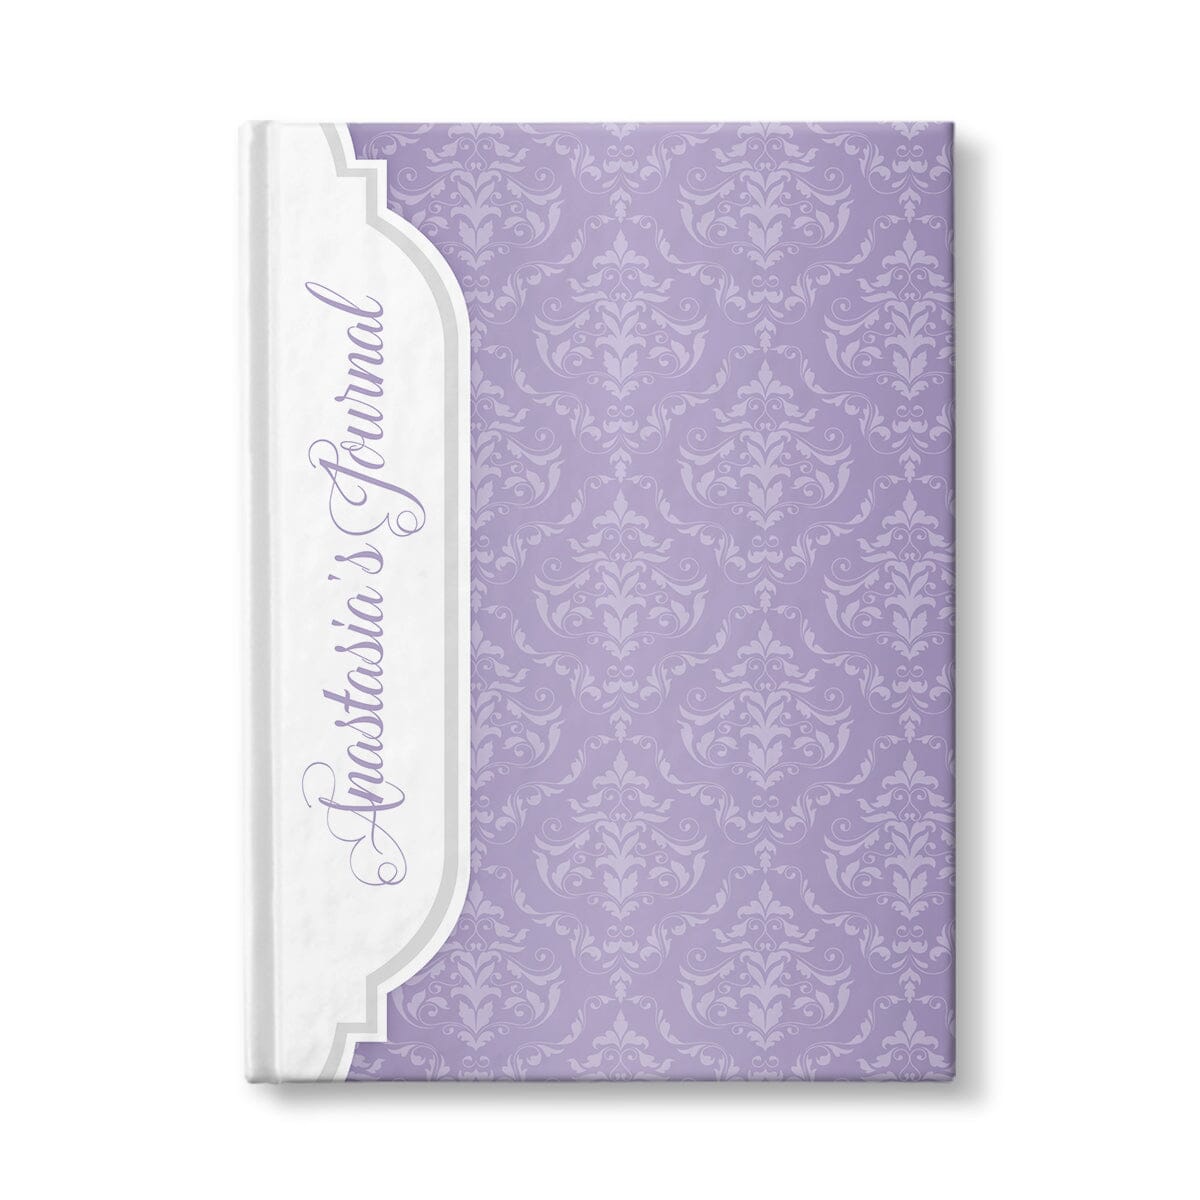 Personalized Purple Damask Journal at Artistically Invited.